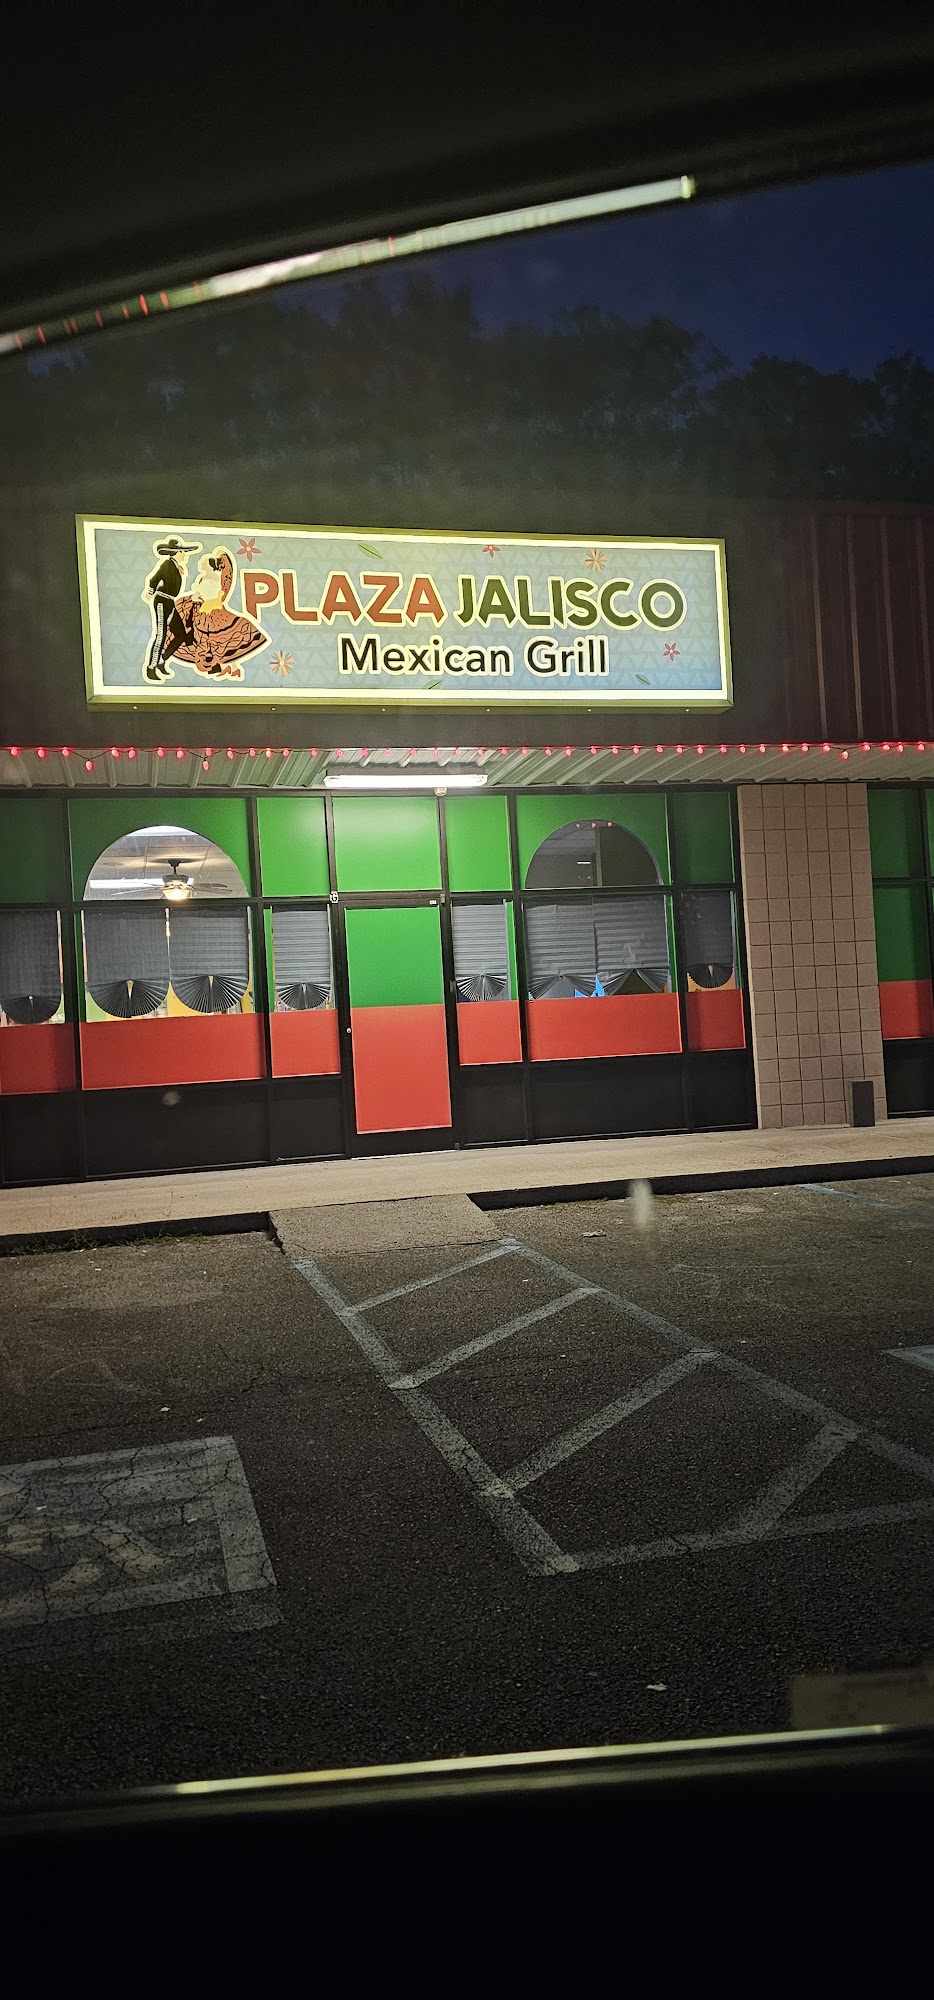 Plaza Jalisco Mexican Grill